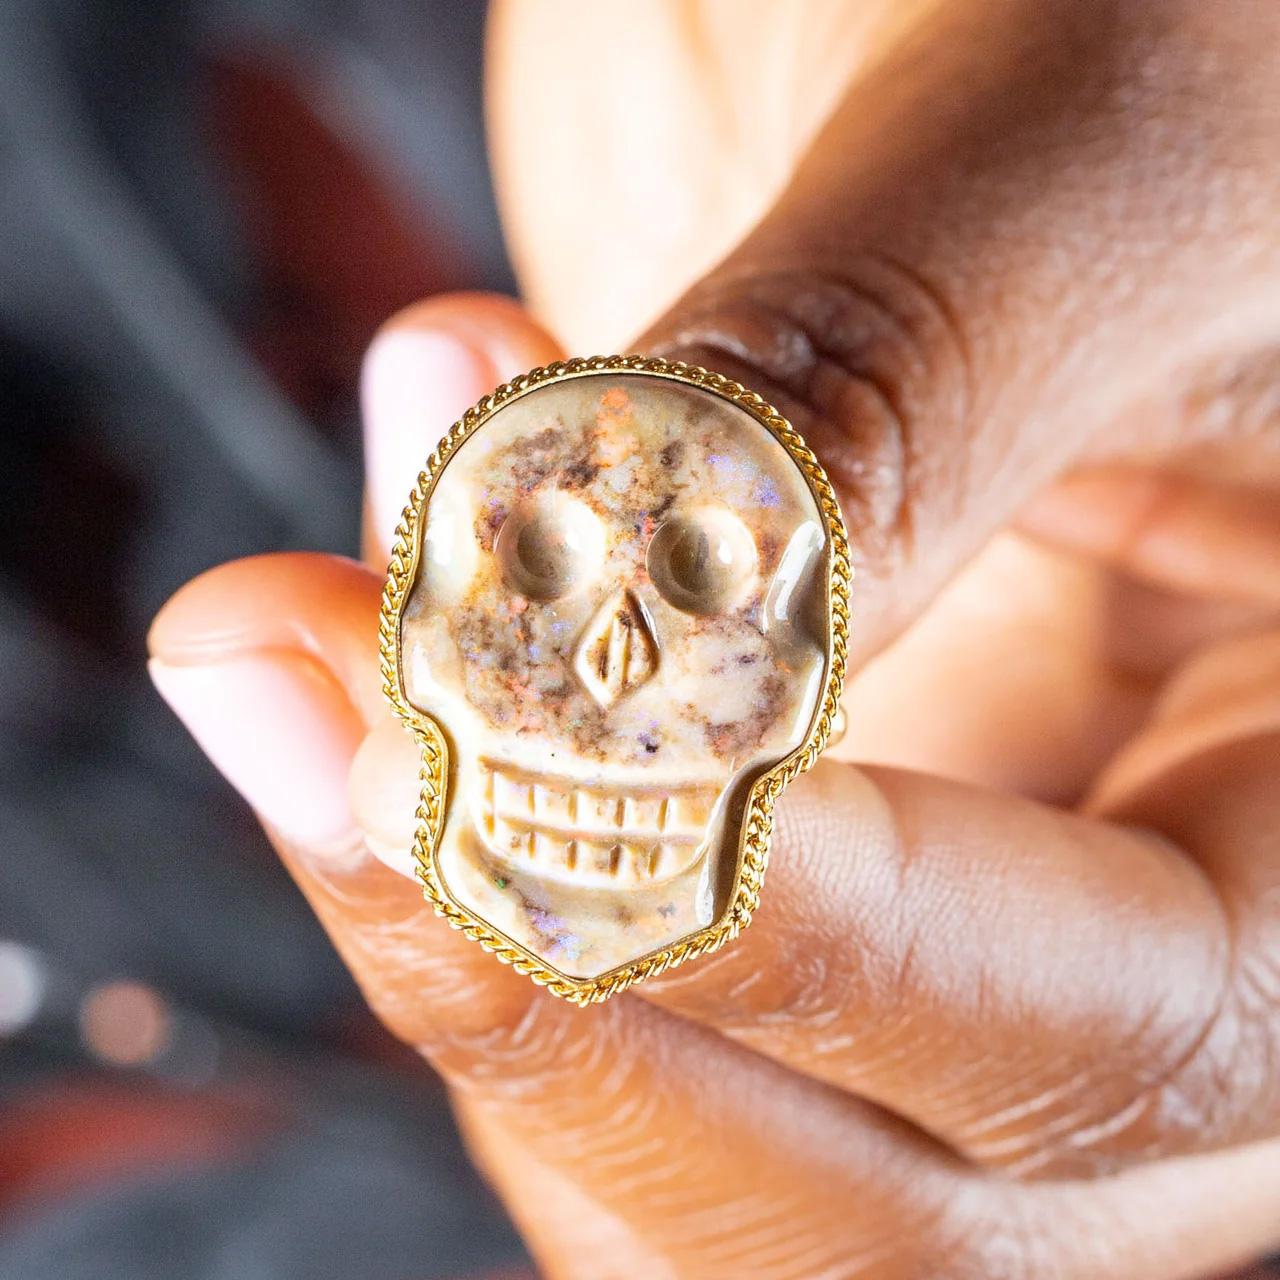 Glints of red, green, and blue dance across the surface of this carved Andamooka Opal skull. Blemishes of brown and black add to the hauntingly realistic appearance of this spooky skull ring. Set in an 18k gold bezel with braided detail.

Ready to